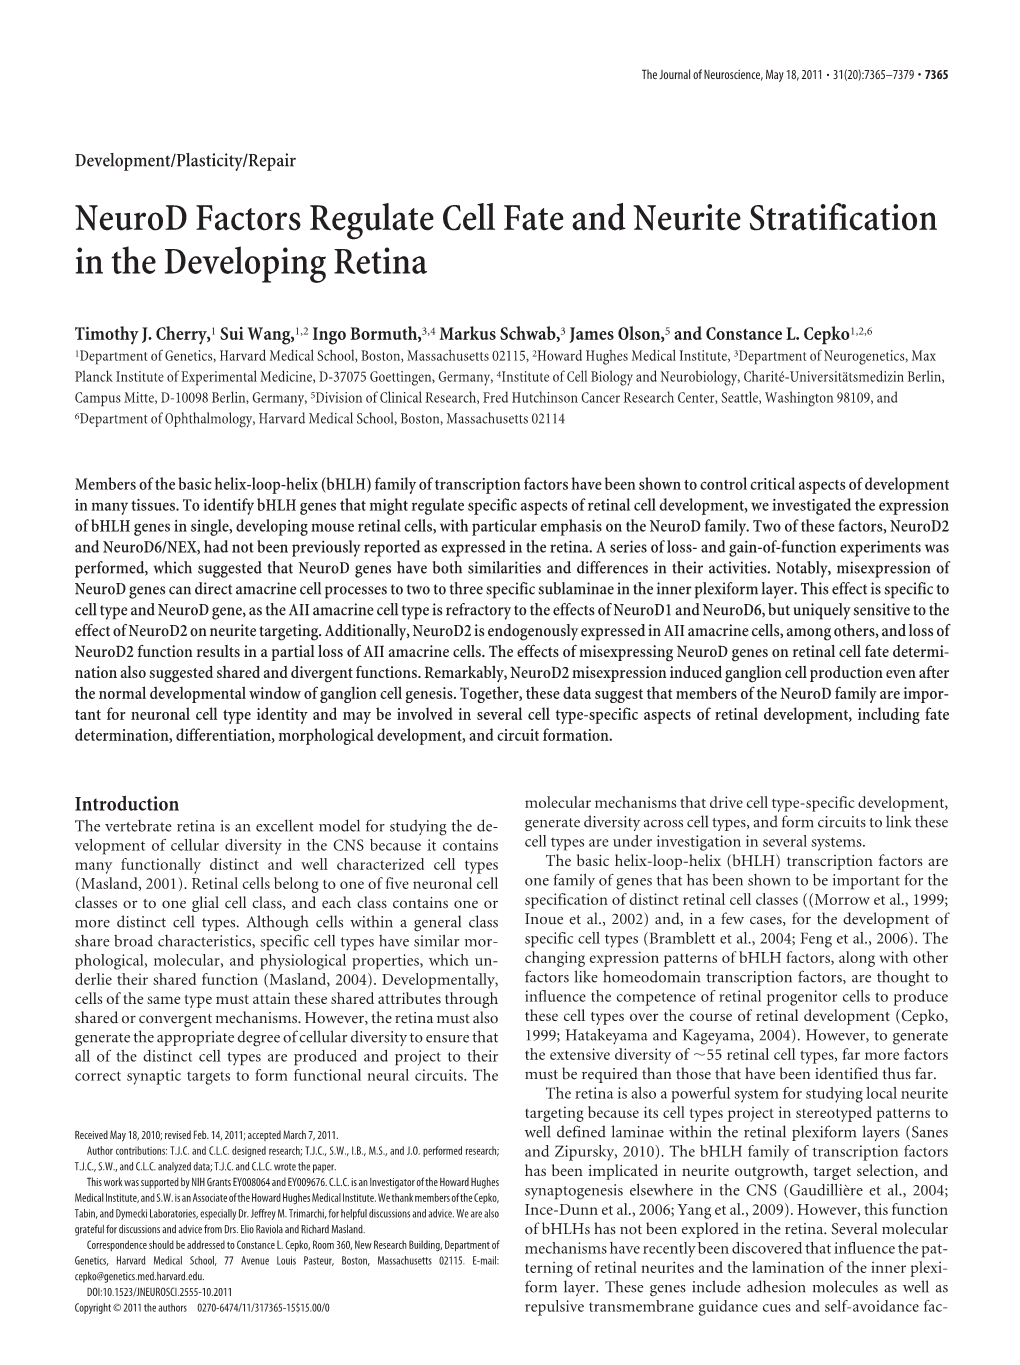 Neurod Factors Regulate Cell Fate and Neurite Stratification in the Developing Retina